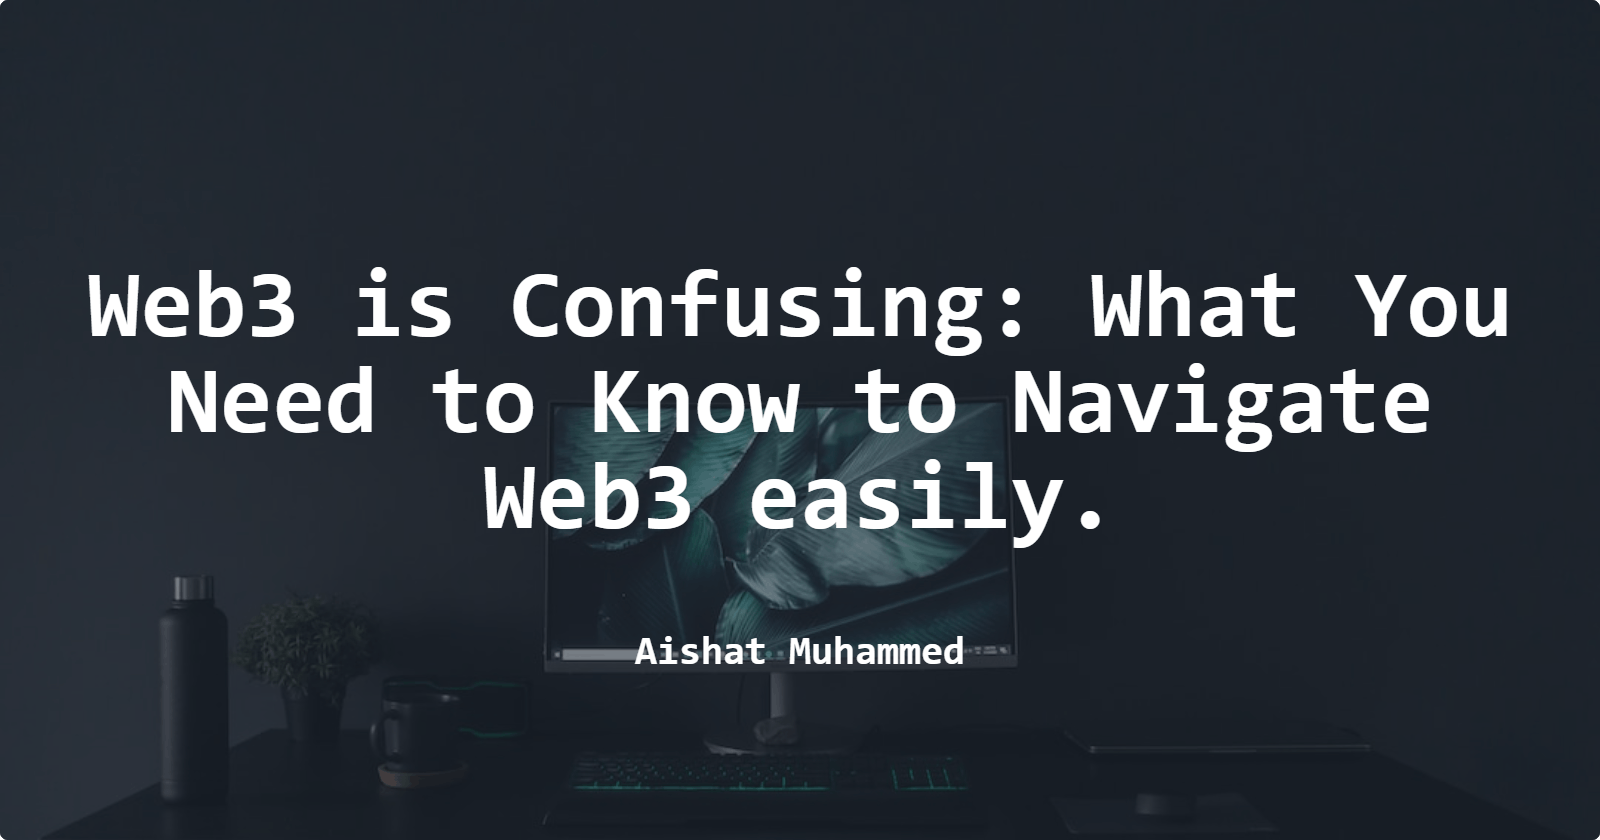 Web3 is Confusing: What You Need to Know to Navigate Web3 easily.